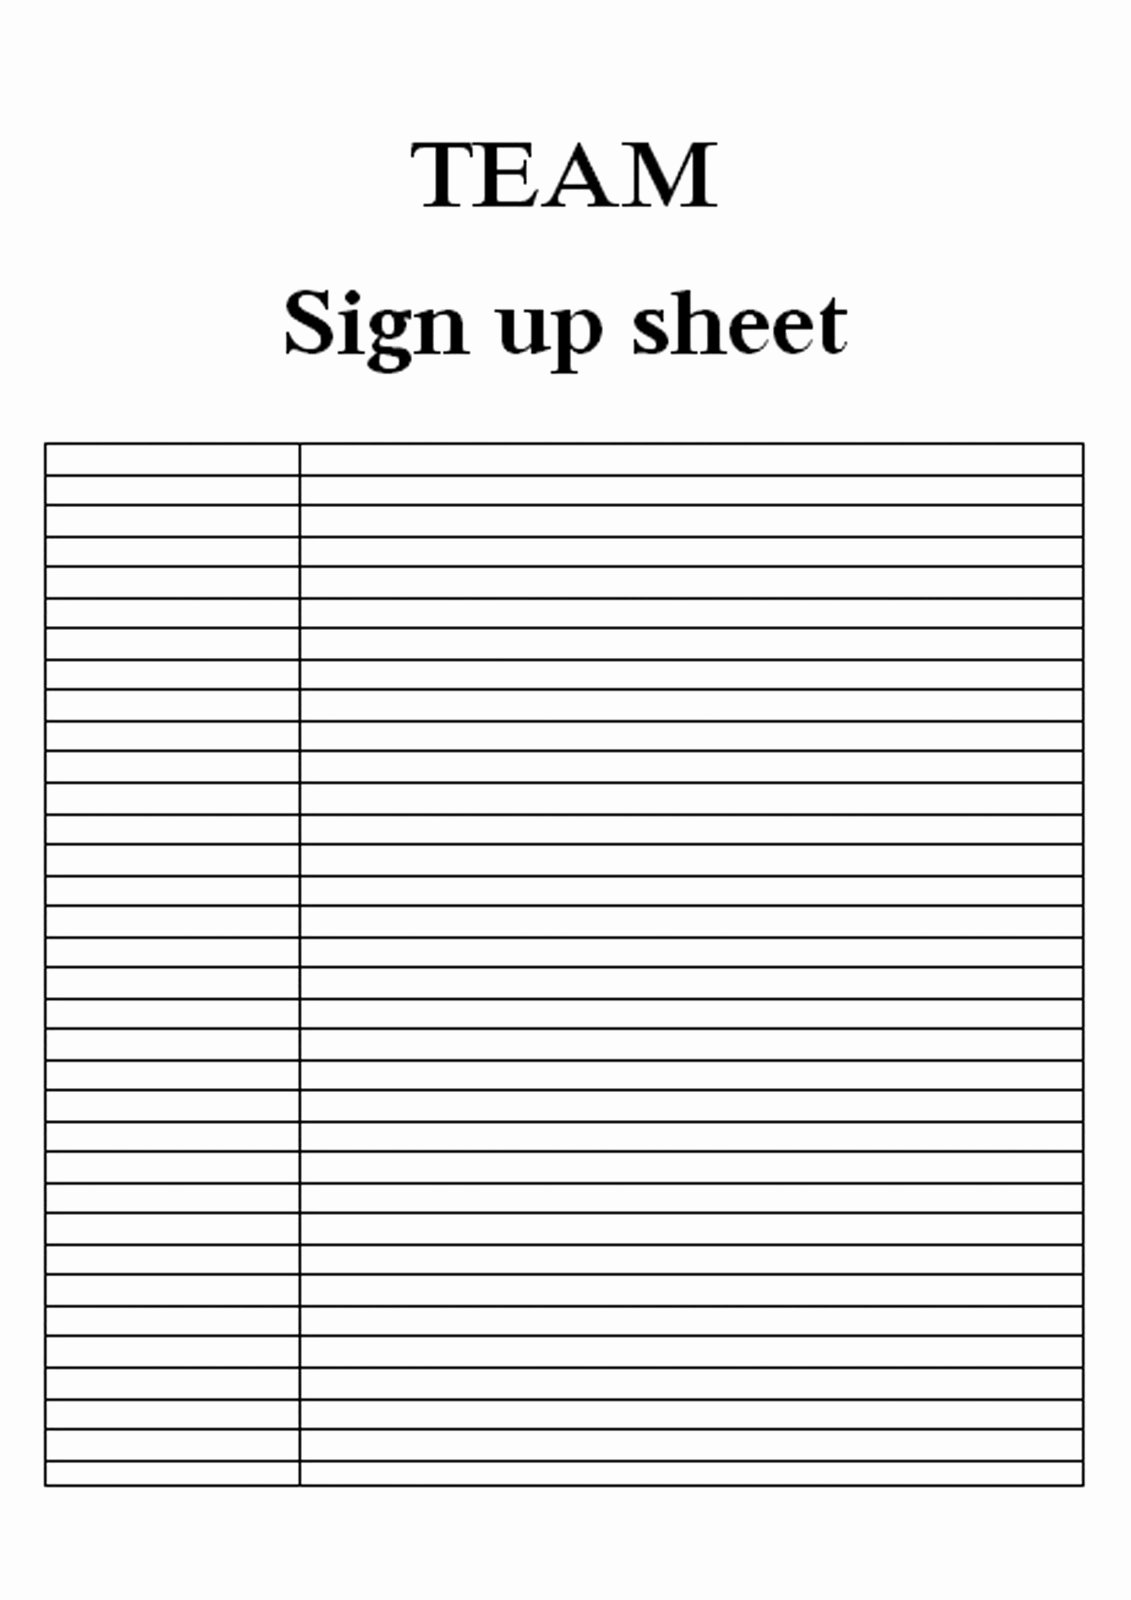 Potluck Signup Sheet Word Luxury Potluck Sign Up Sheet Word for events